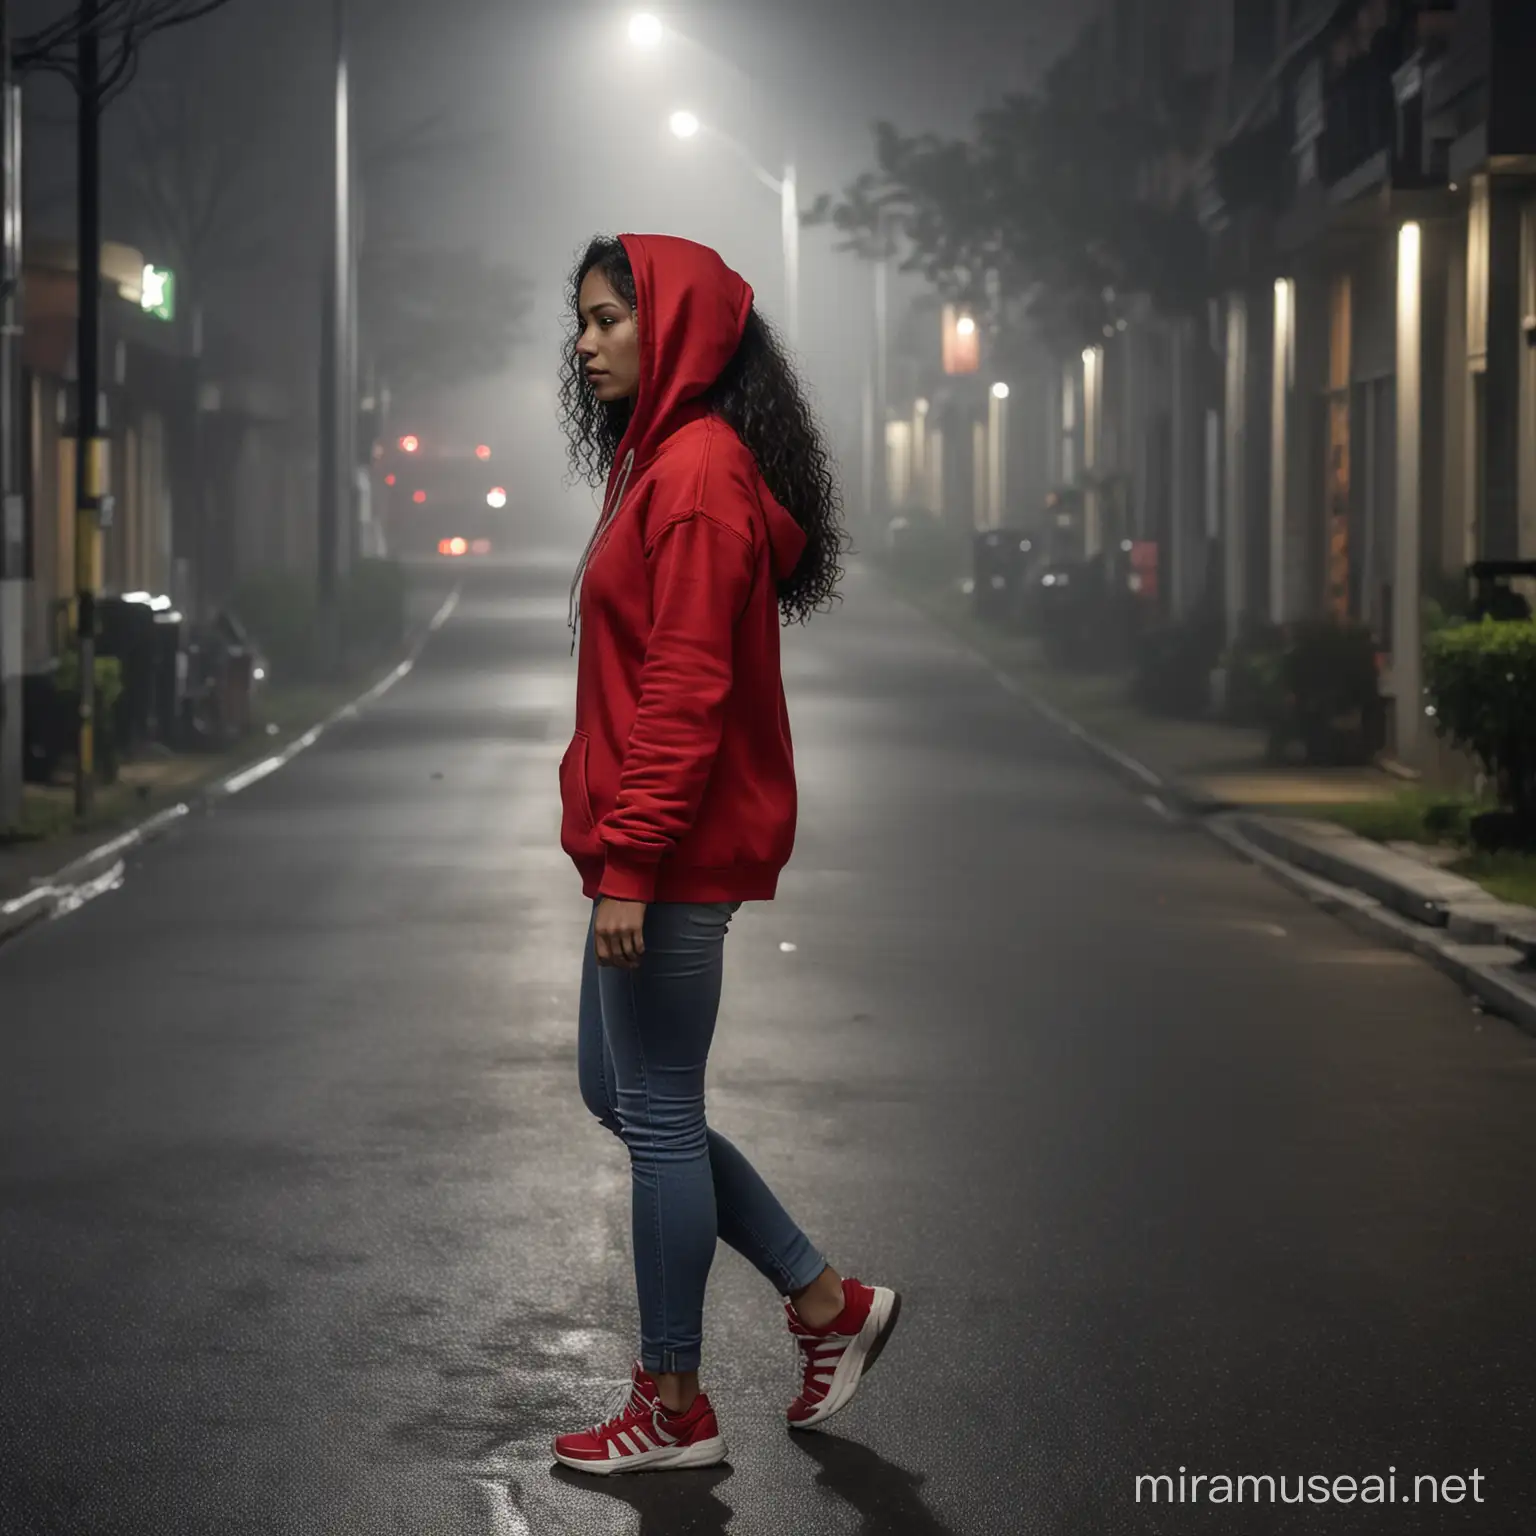 Potrait of an Indonesia n woman with long andcurly hair wearinga red Hoodie and sneaker, walking alone, wLki g  on the side of the road marking on the side walking on the sidewalk the light behind her from the headlight of passing care a dark foogy night with street light and city building visiblein the distance cinematic images dynamic lighting looking at the camera